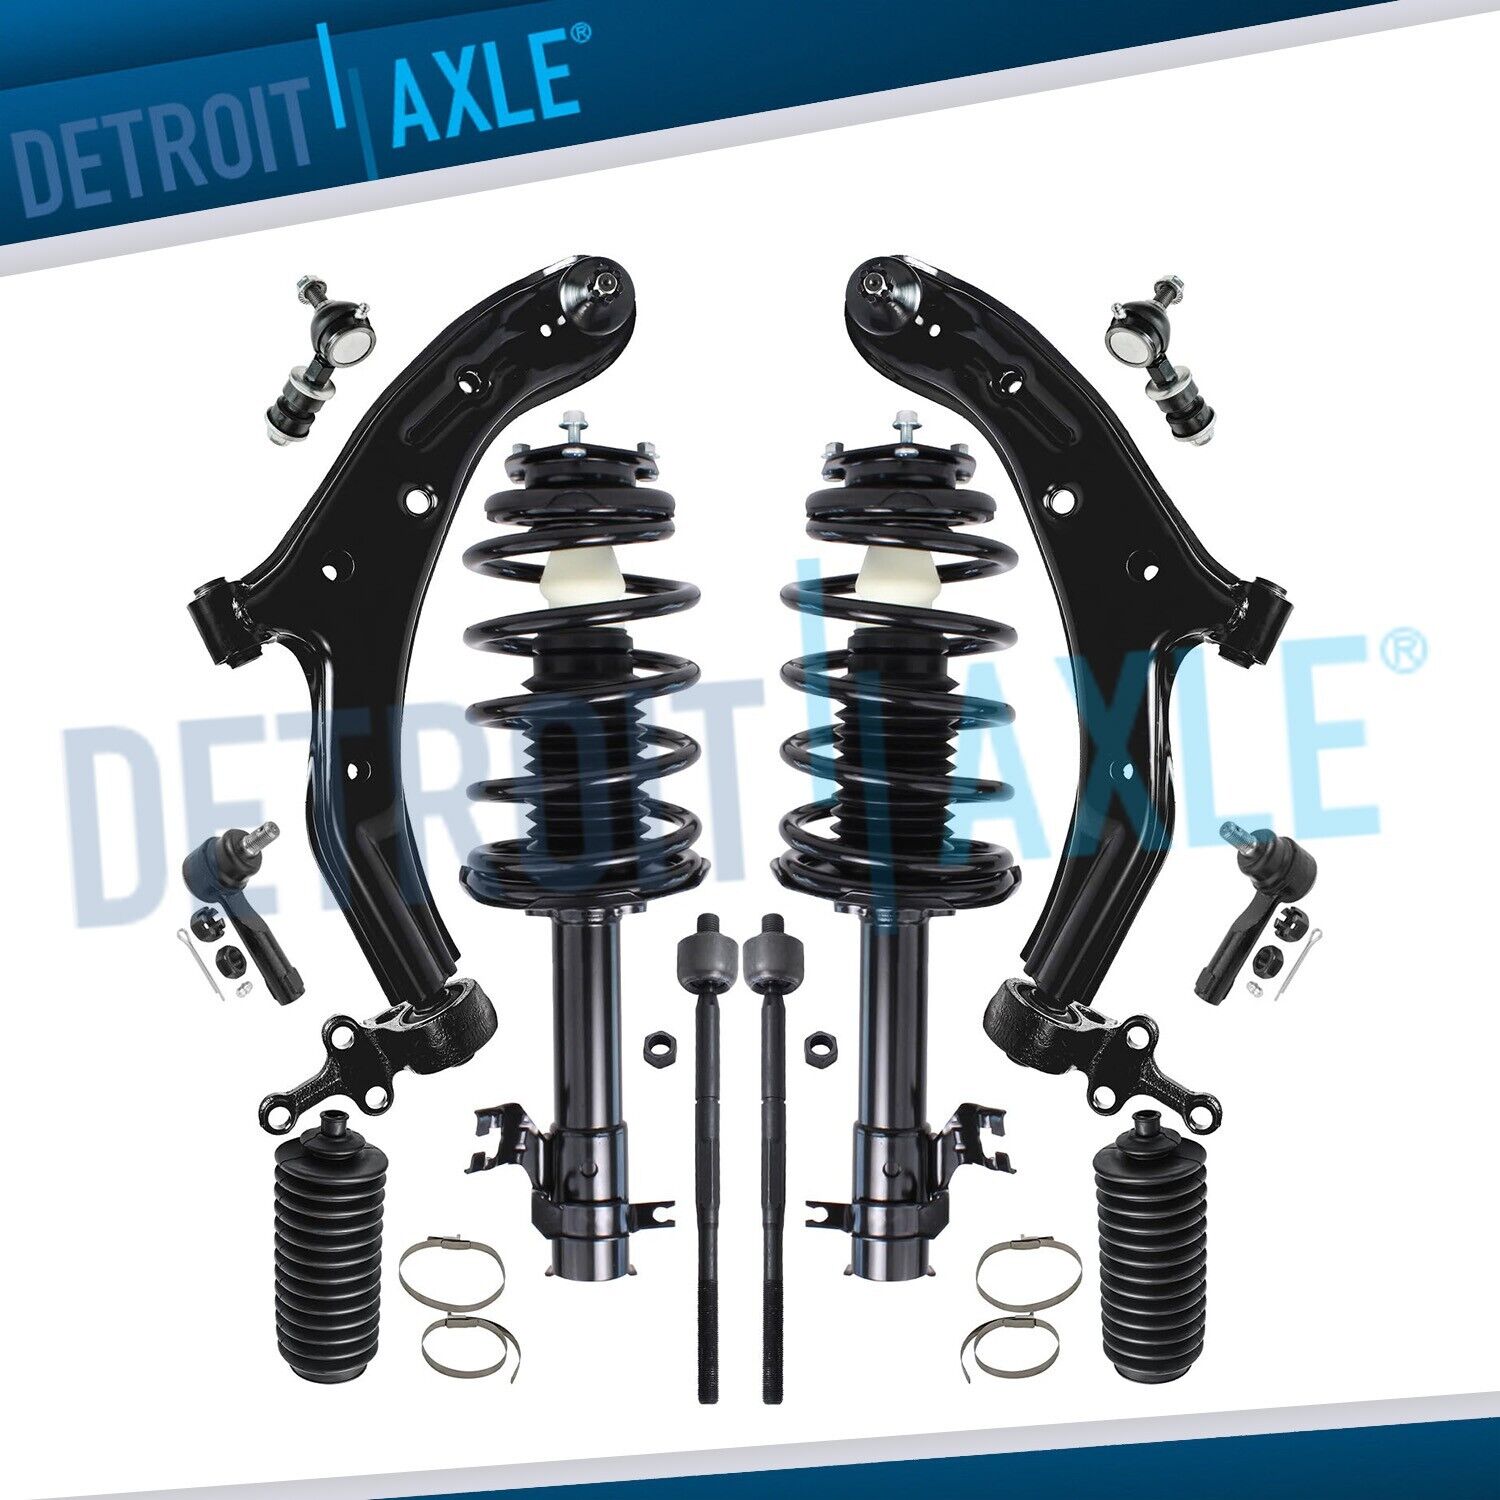 For 2002-2006 Nissan Sentra 1.8L Front Struts Lower Control Arms Suspension Kit